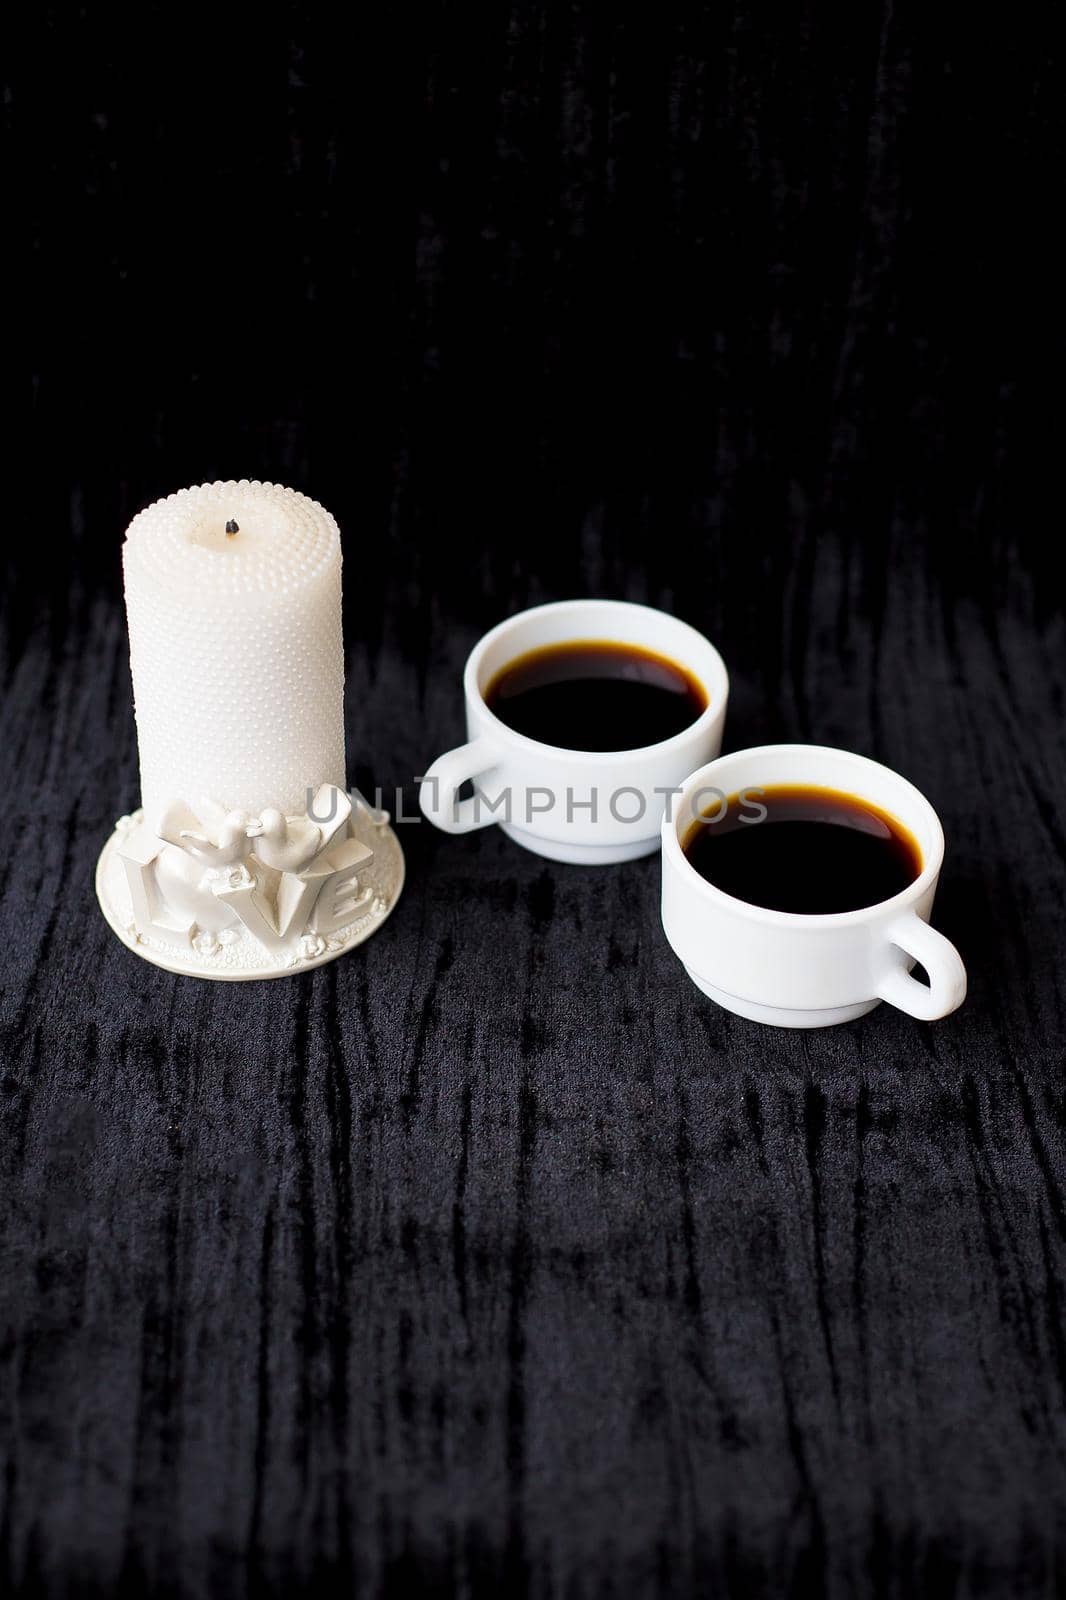 candle and two cups of coffee on a black background.